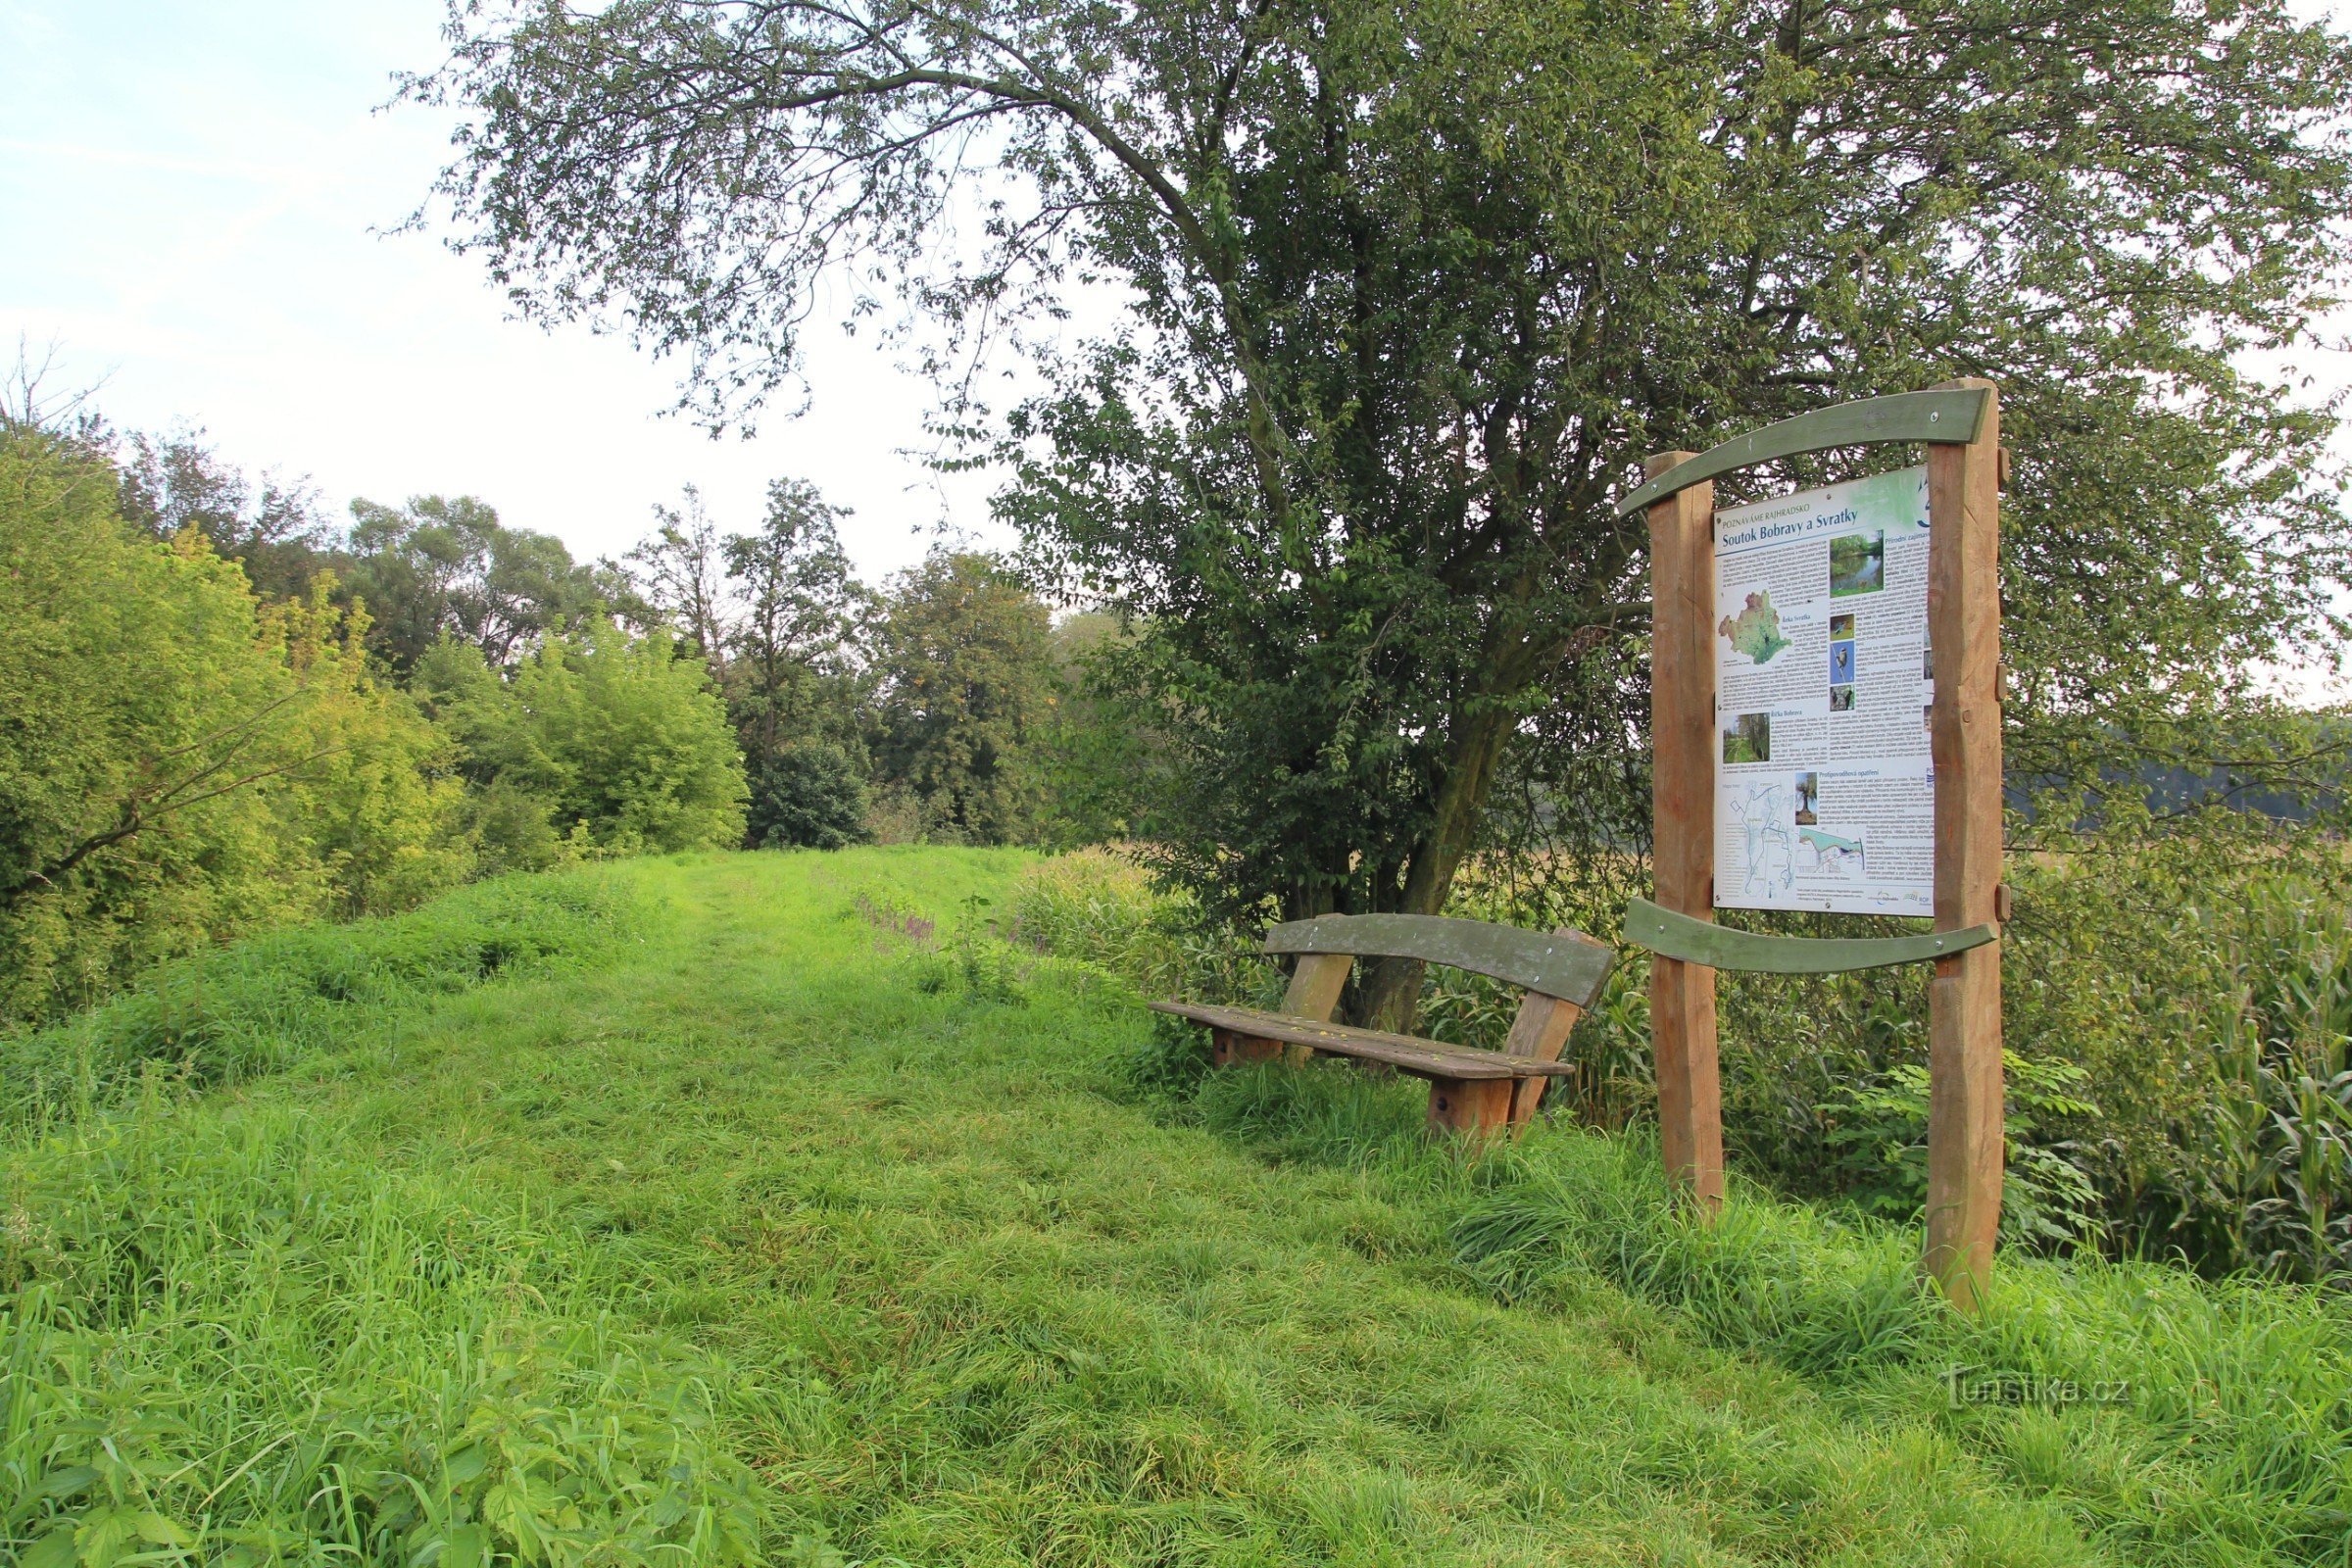 At the confluence there is a resting place and an information board describing the place in detail